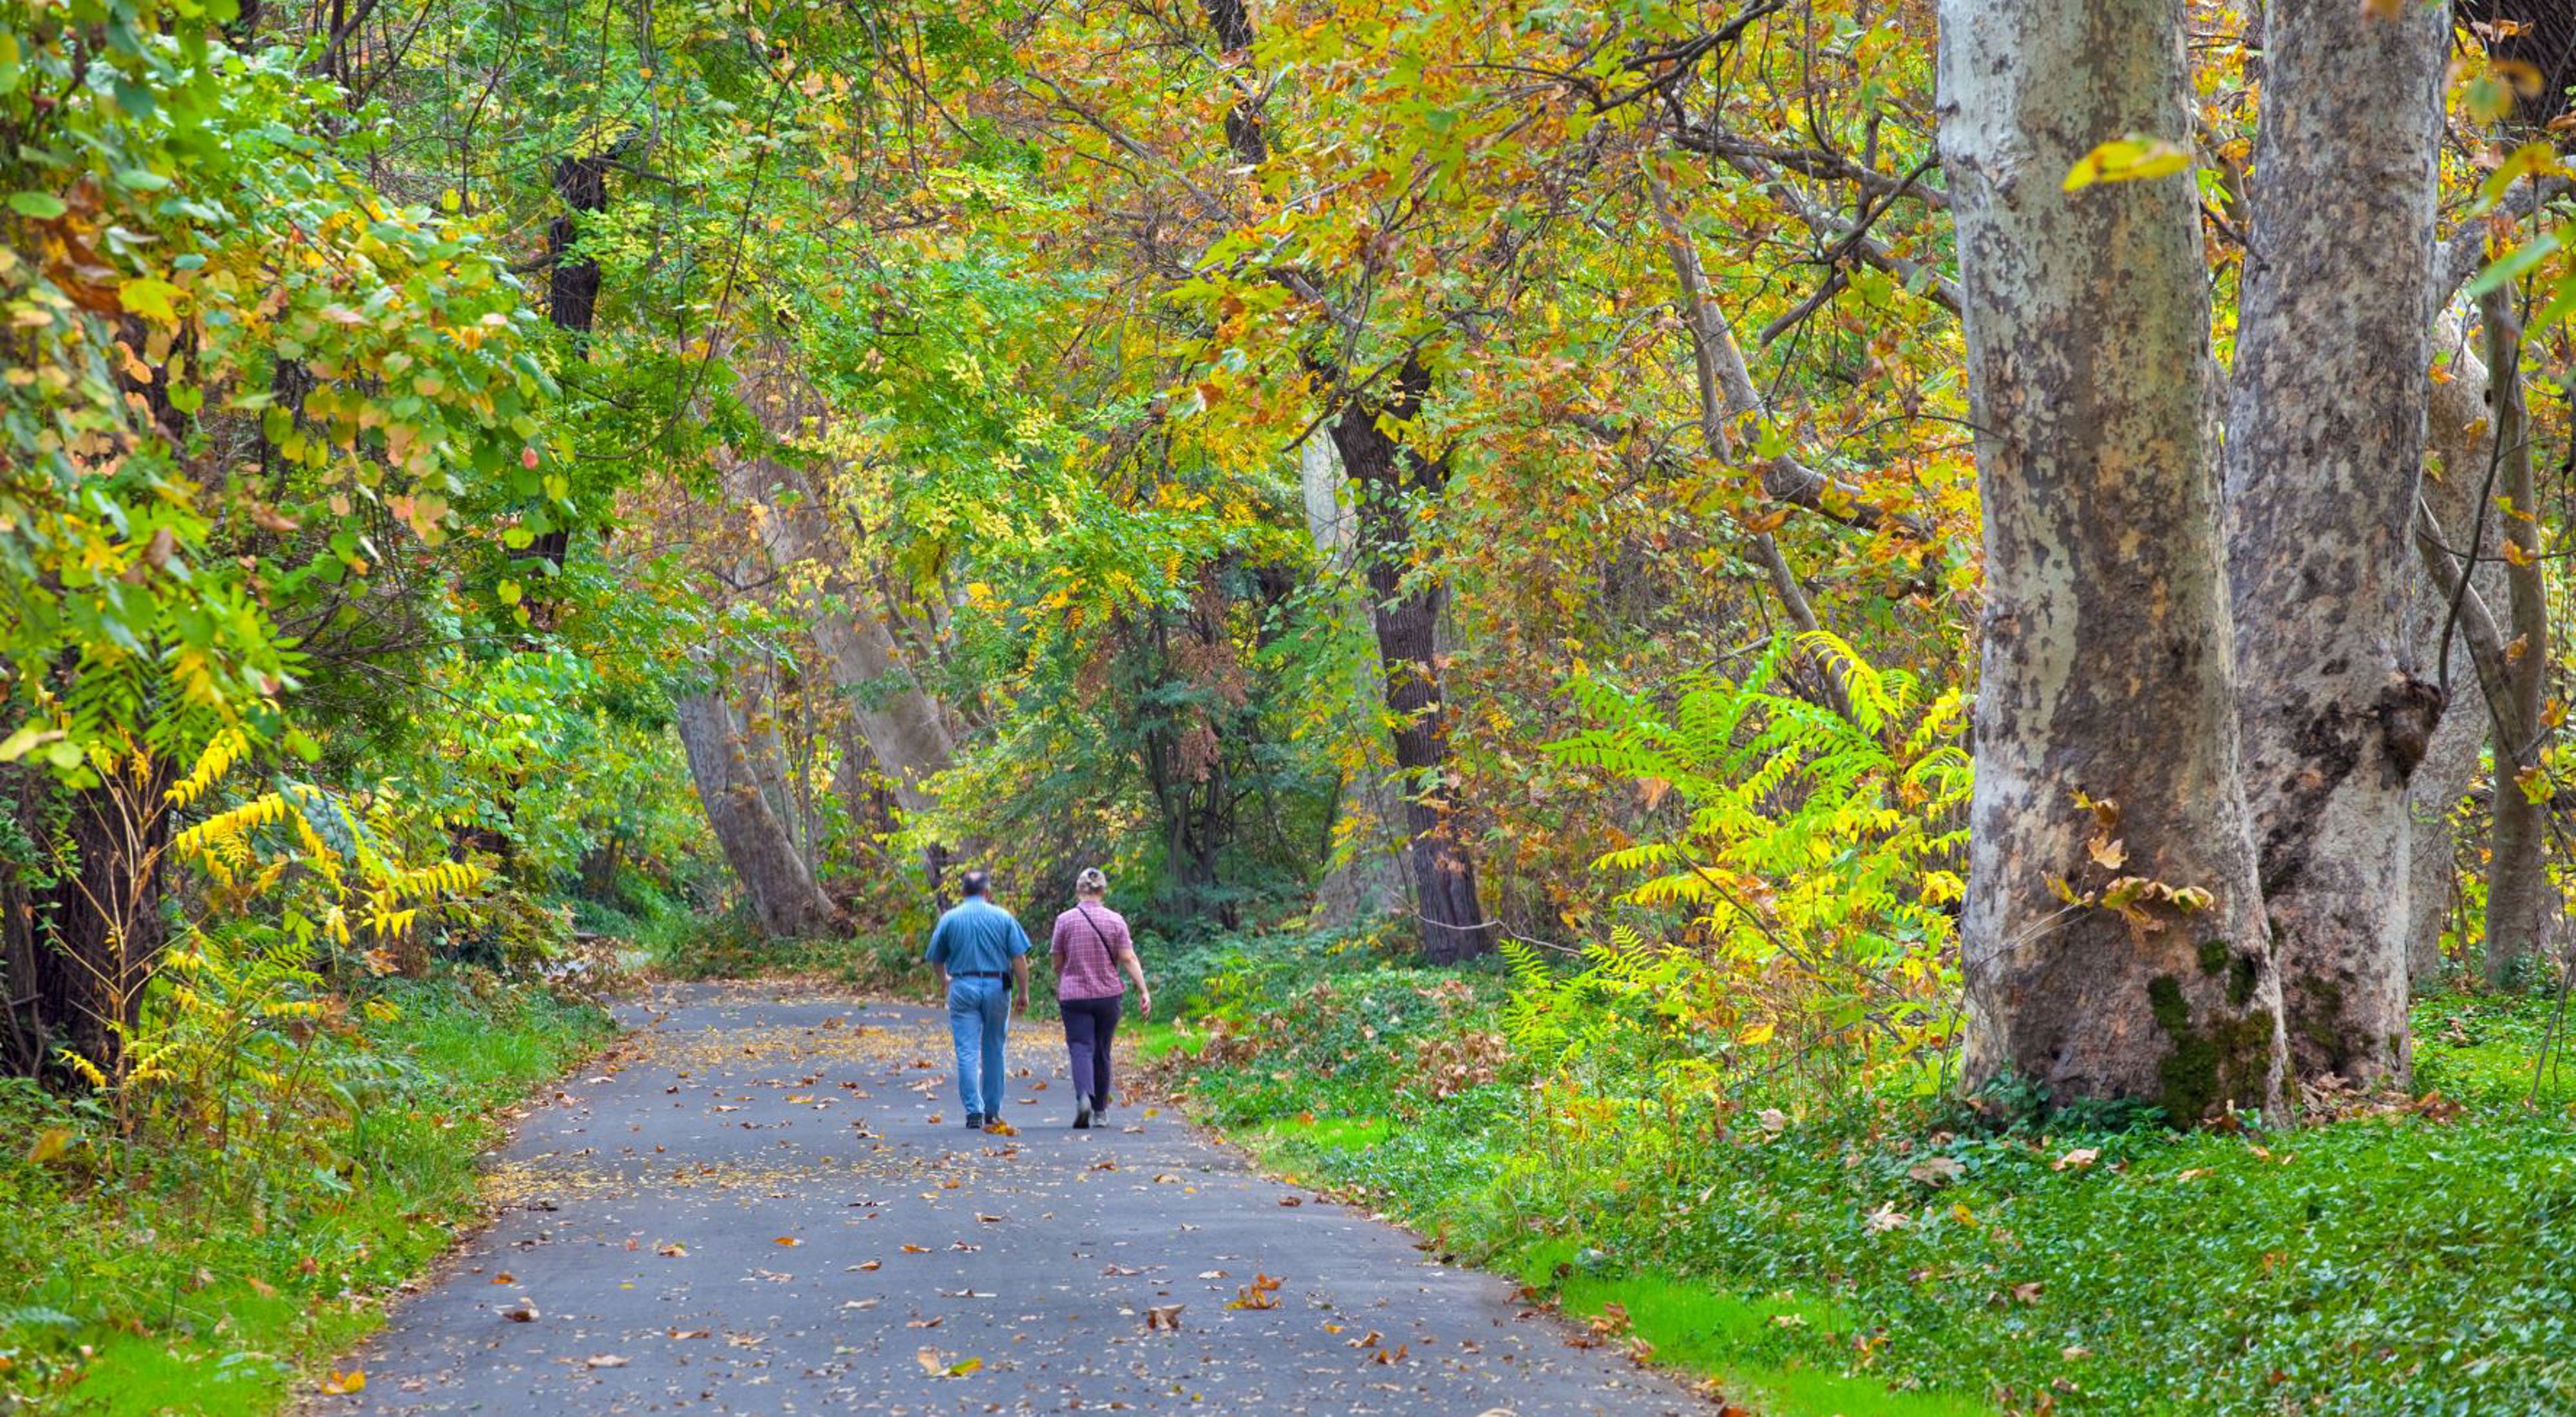 Two people walking down a wide path through a forest.